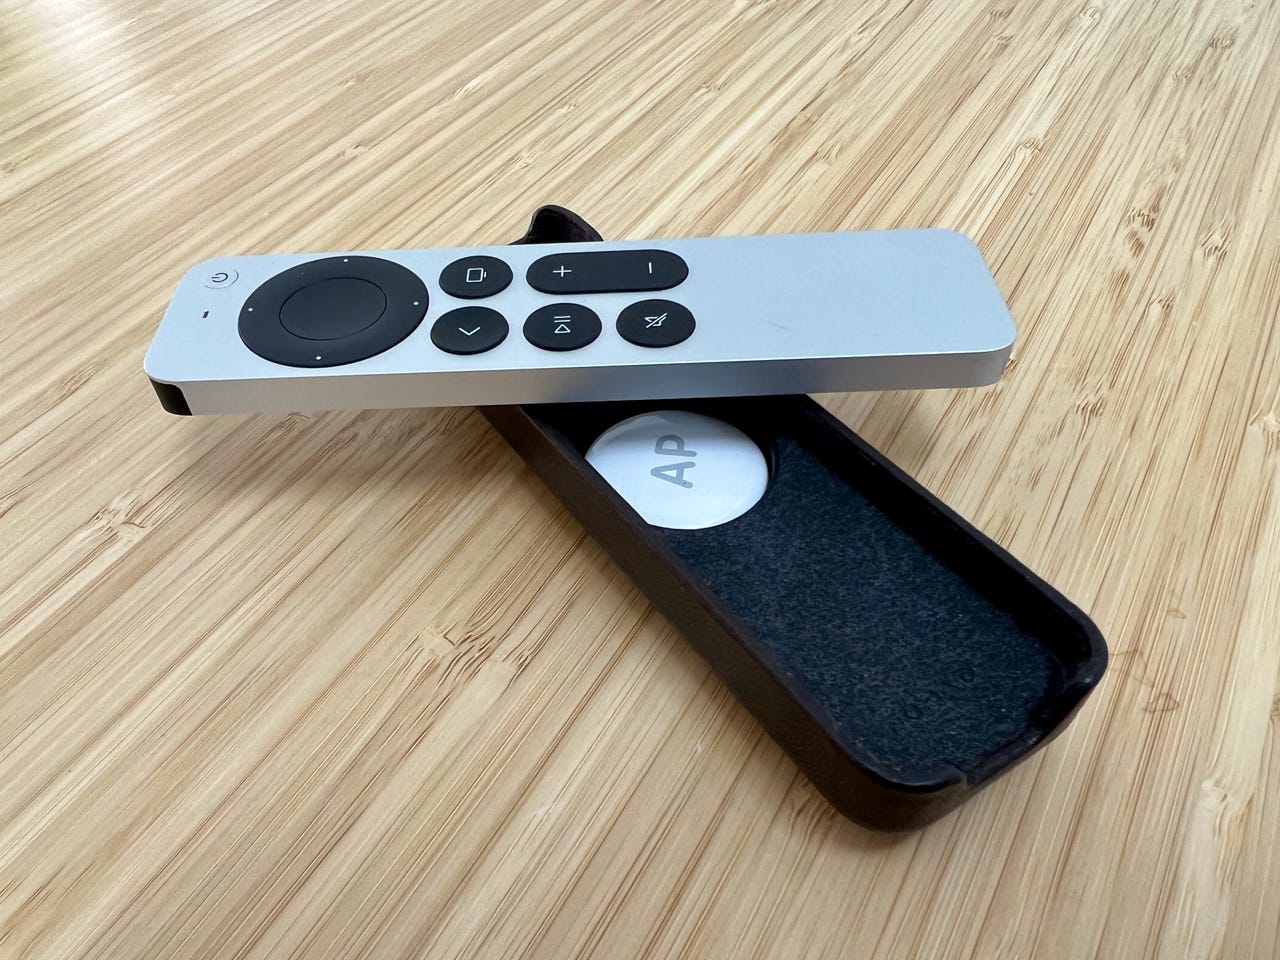 This accessory lets you add an AirTag to your Apple TV remote